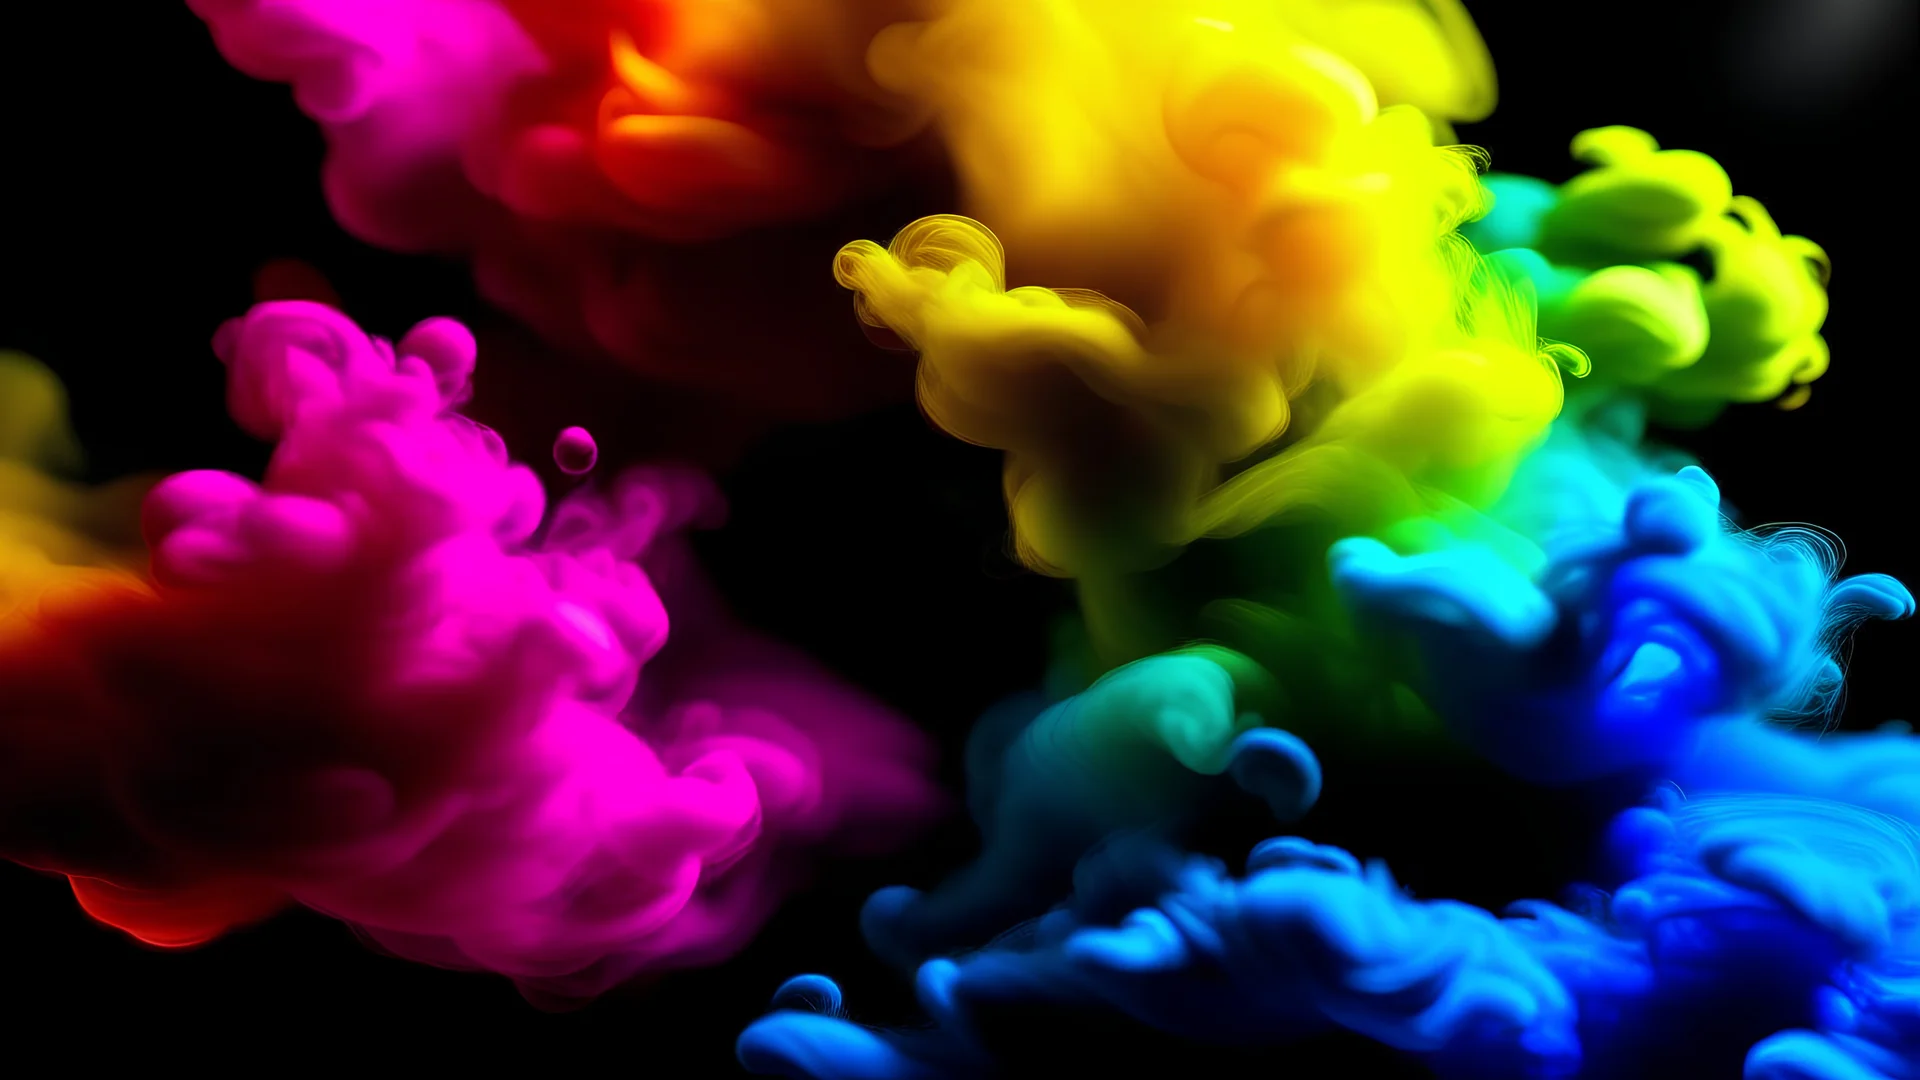 generate an image that Discovers vibrant, multi-colors smokes spread over and behind speakers